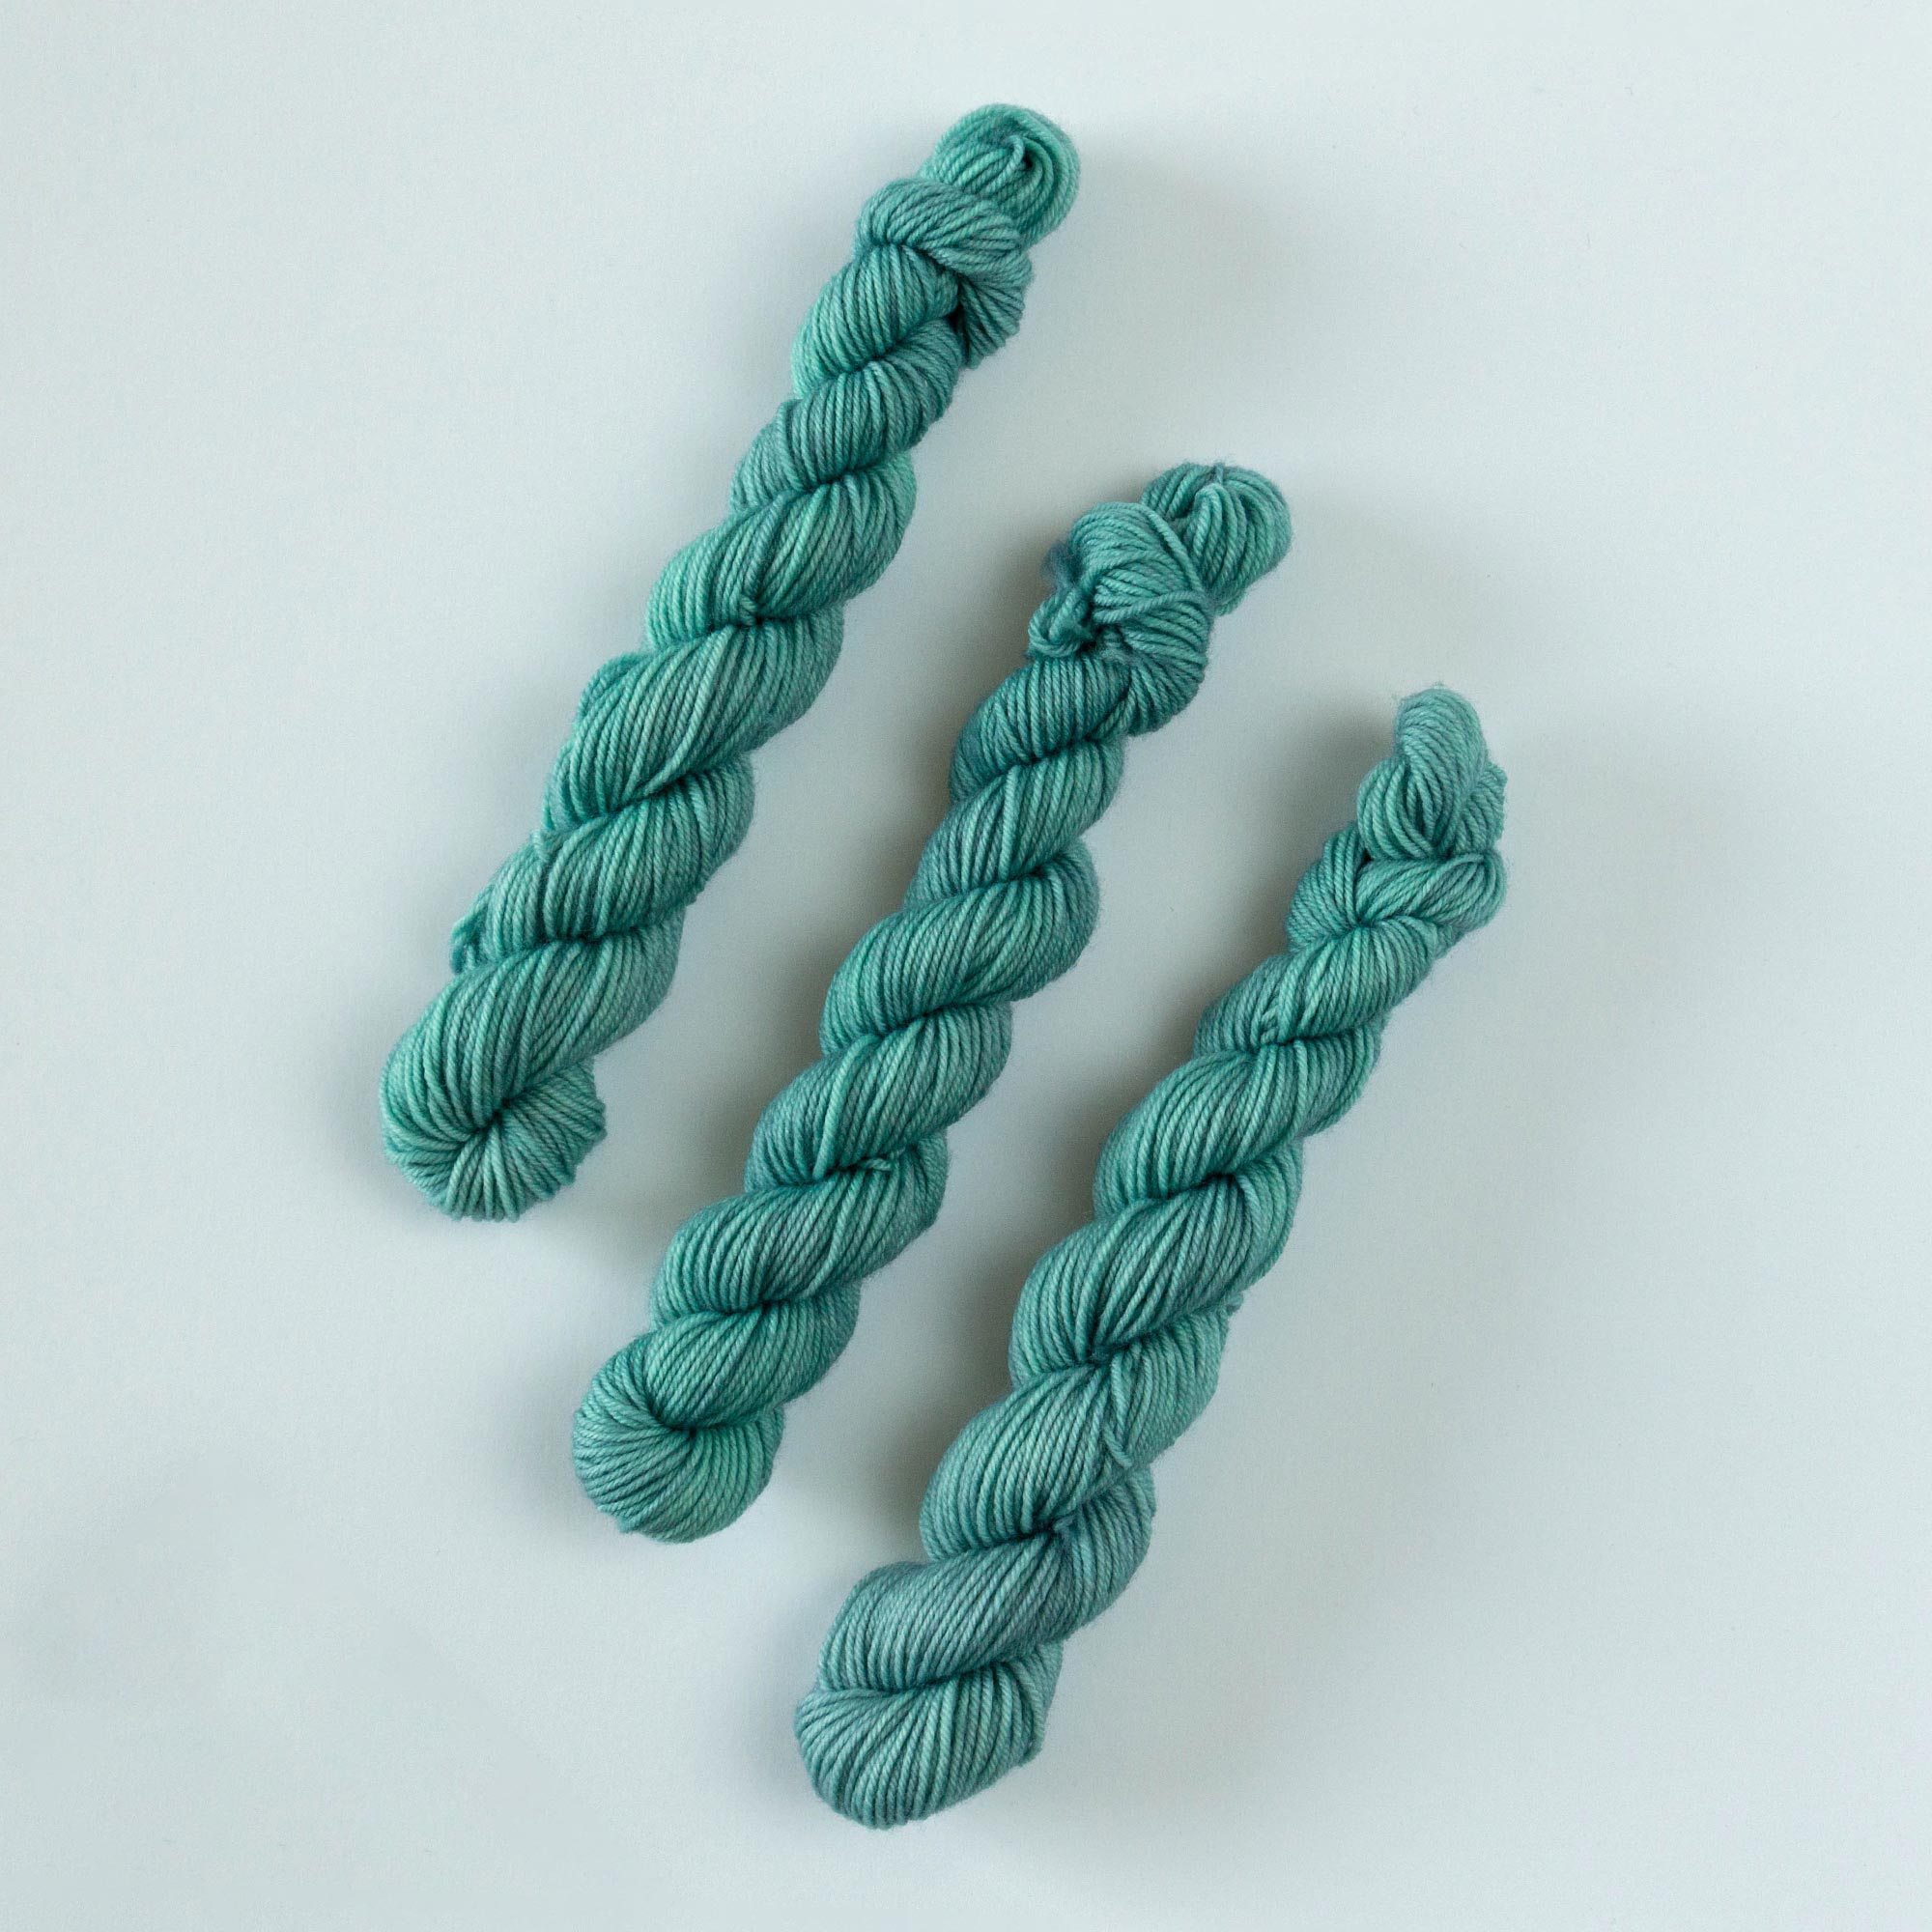 trio of fingering weight mini skeins in teal "shipwreck" colorway